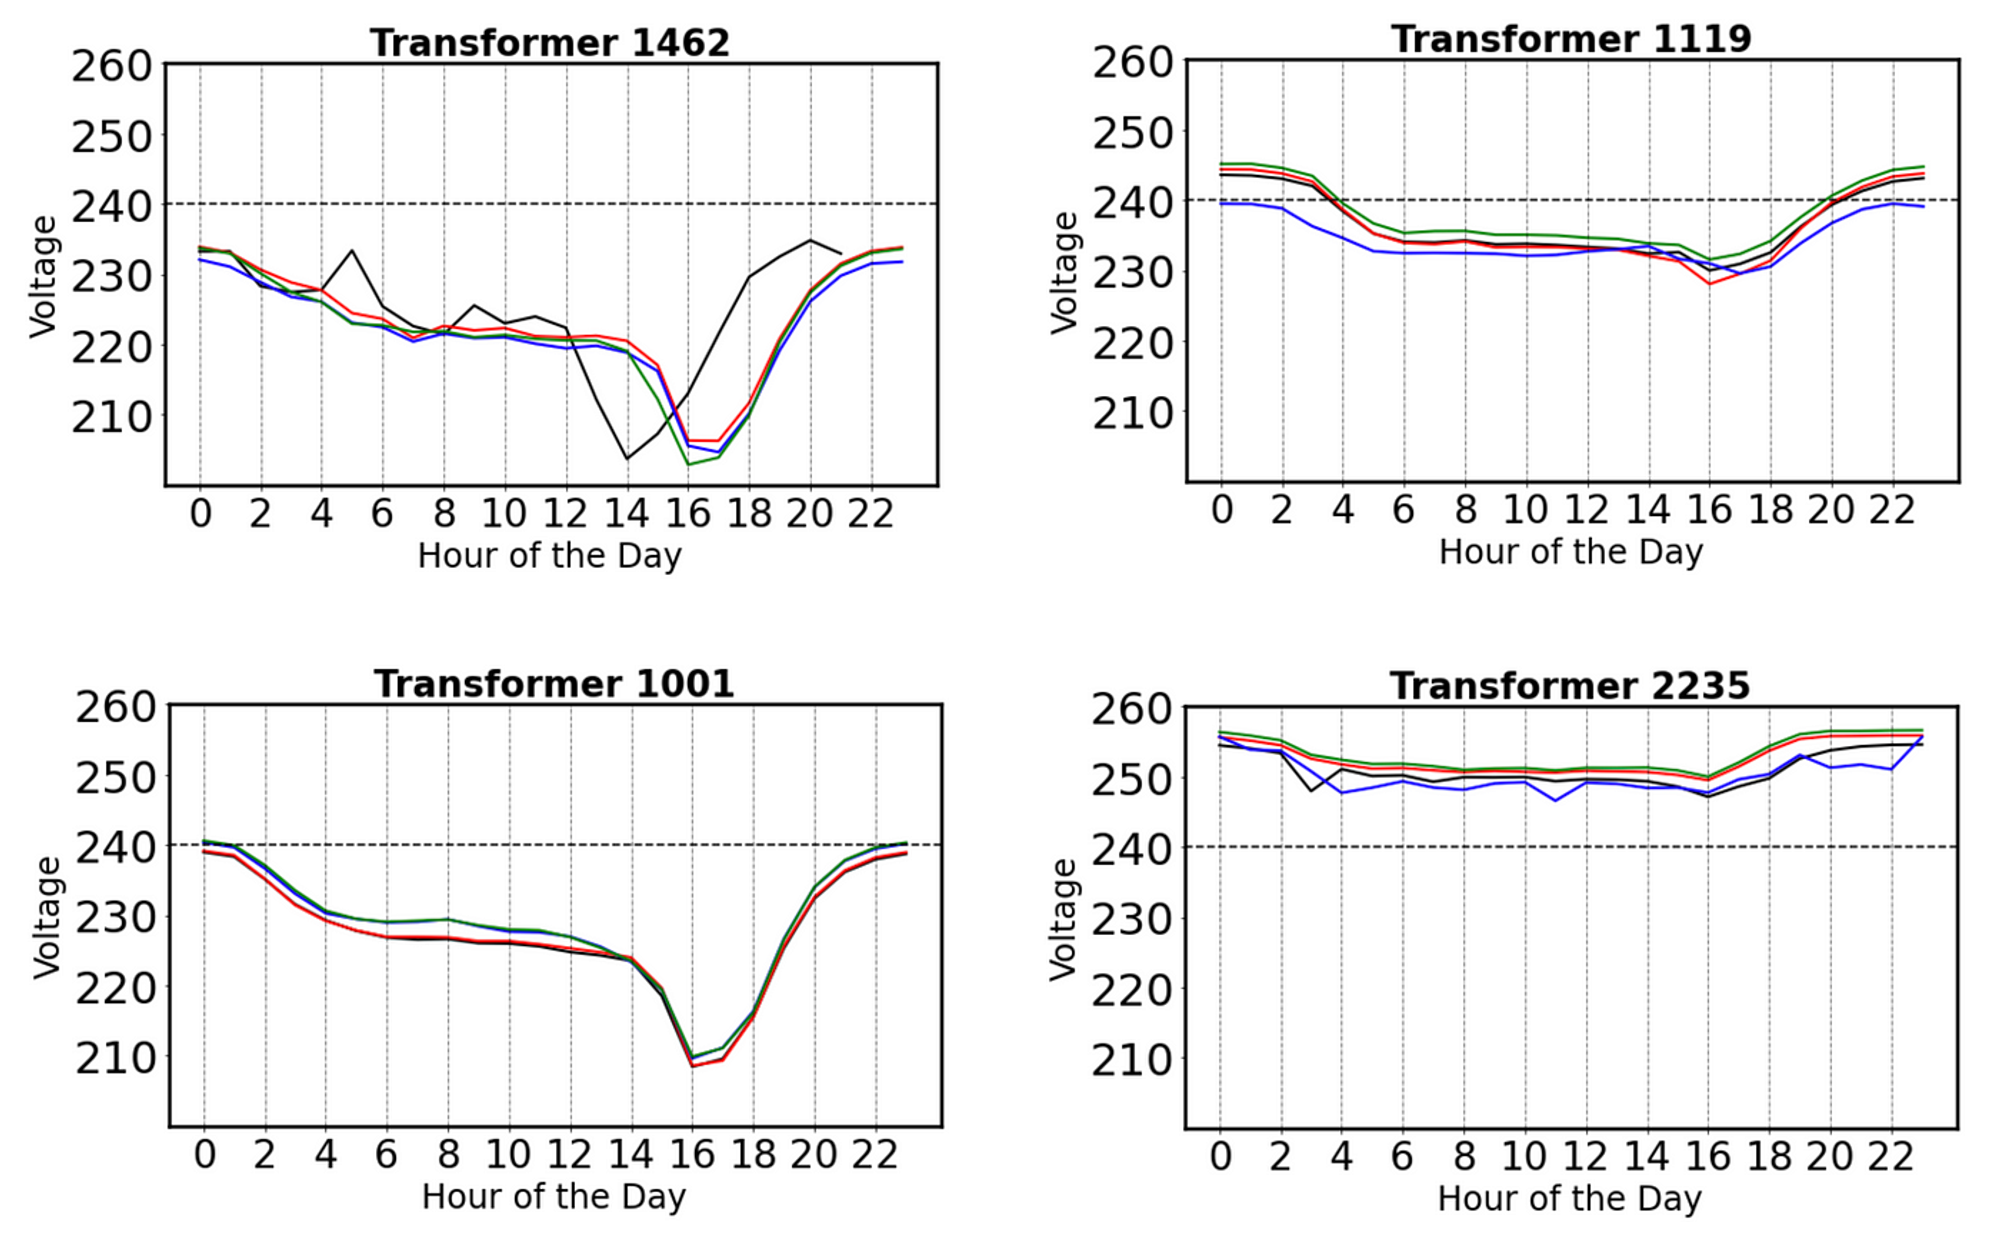 Figure 4: Averaged Voltage Profiles by Hour of Day. This set of graphs shows average voltage profile over hour of day for the sites shown in figure 2. These further affirm the similarity in voltage trends observed in individual sensors connected to the same transformer, as well as the voltage dips happening towards the end of the day.